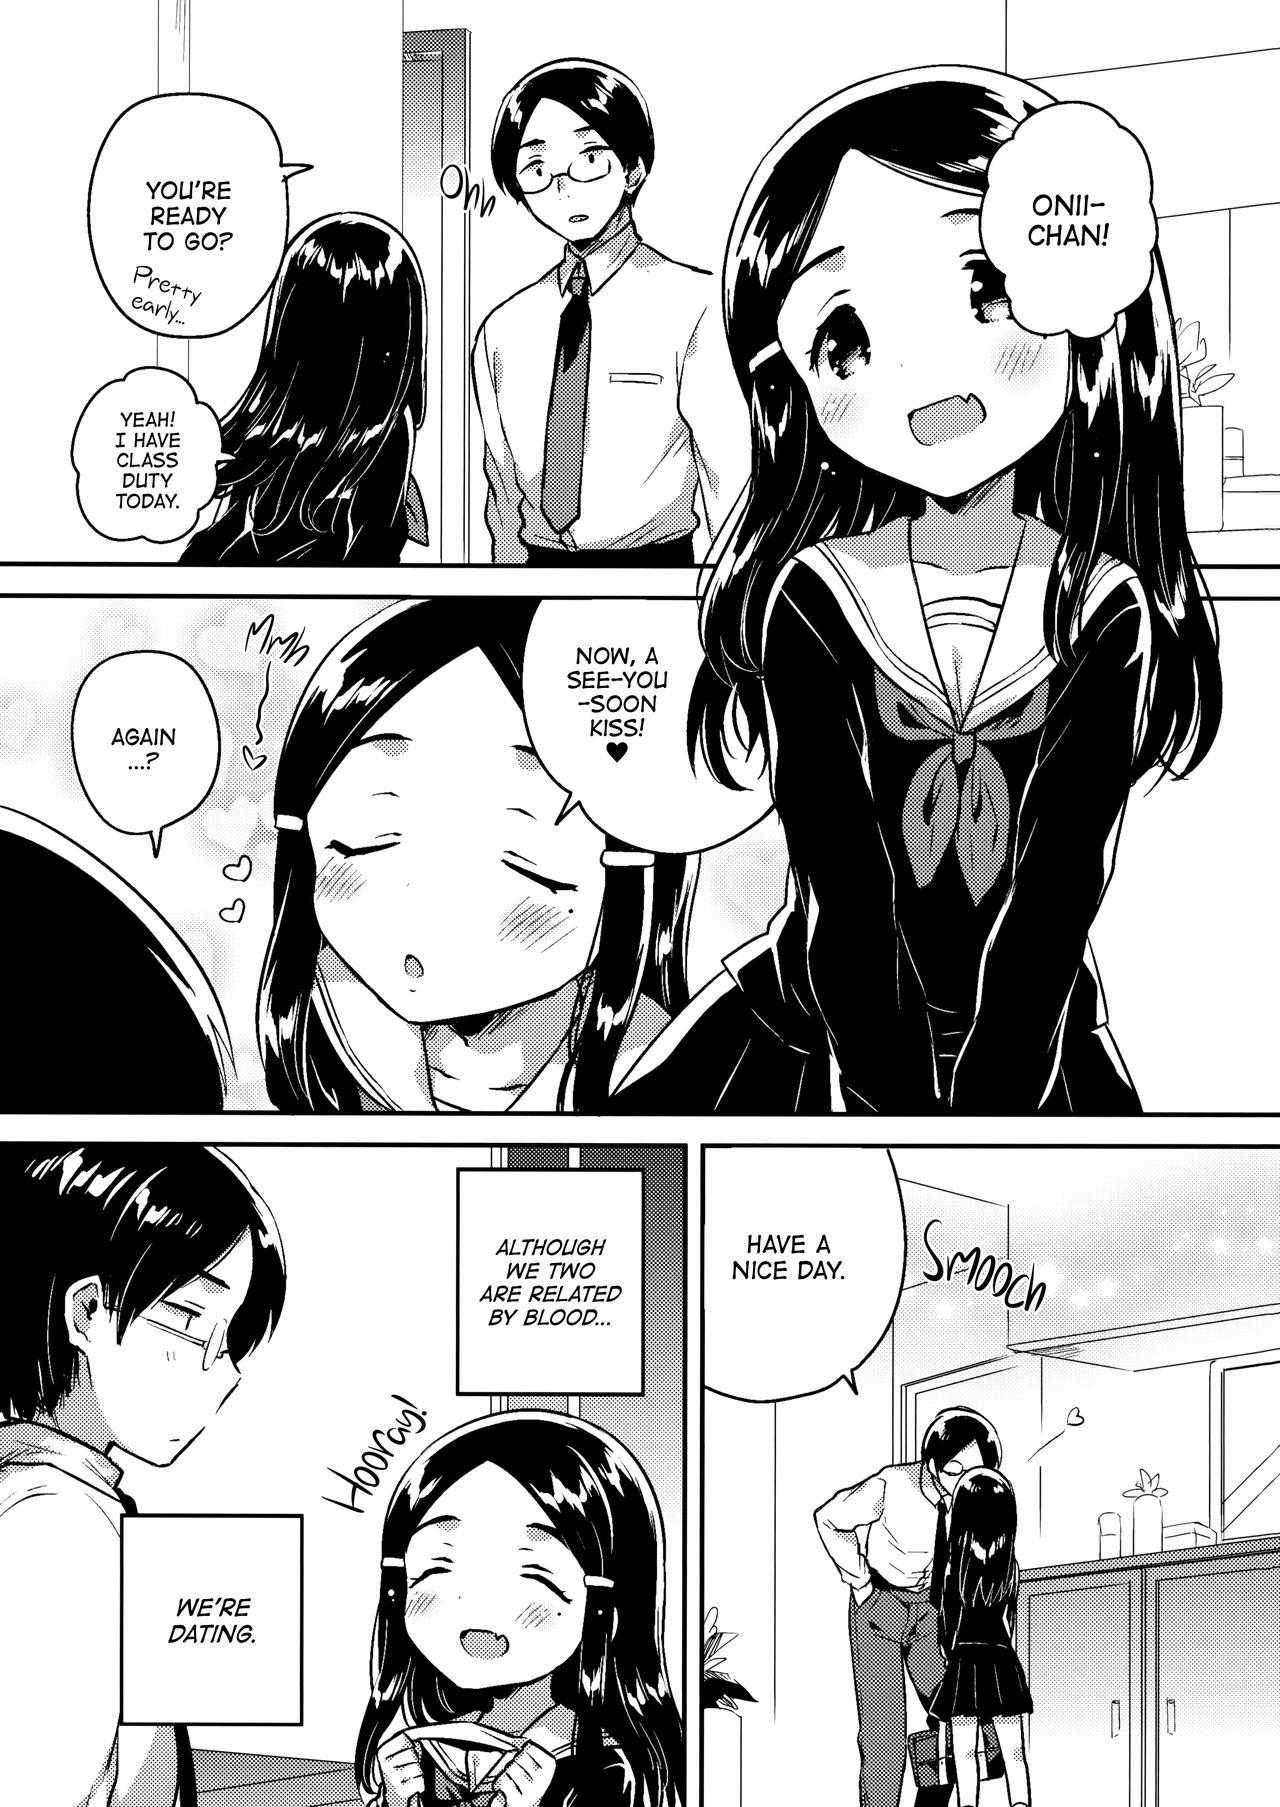 Imouto wa Mistress| My Little Sister Is My Mistress <First Chapter> 2